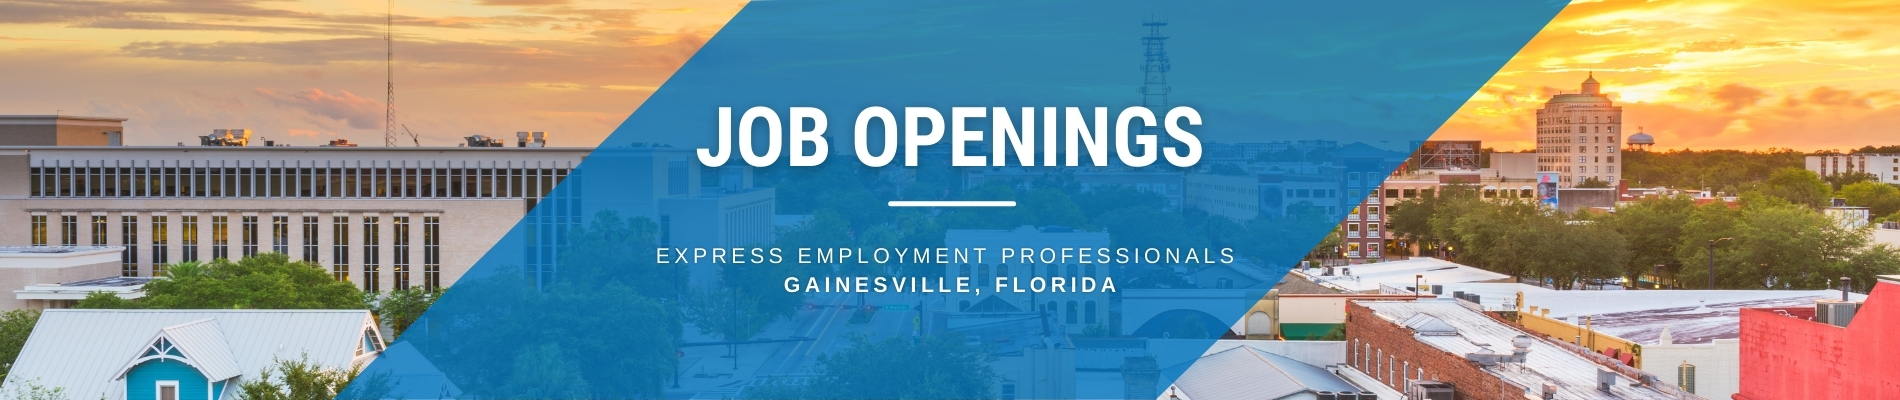 Alachua County Job Openings in Gainesville, Florida